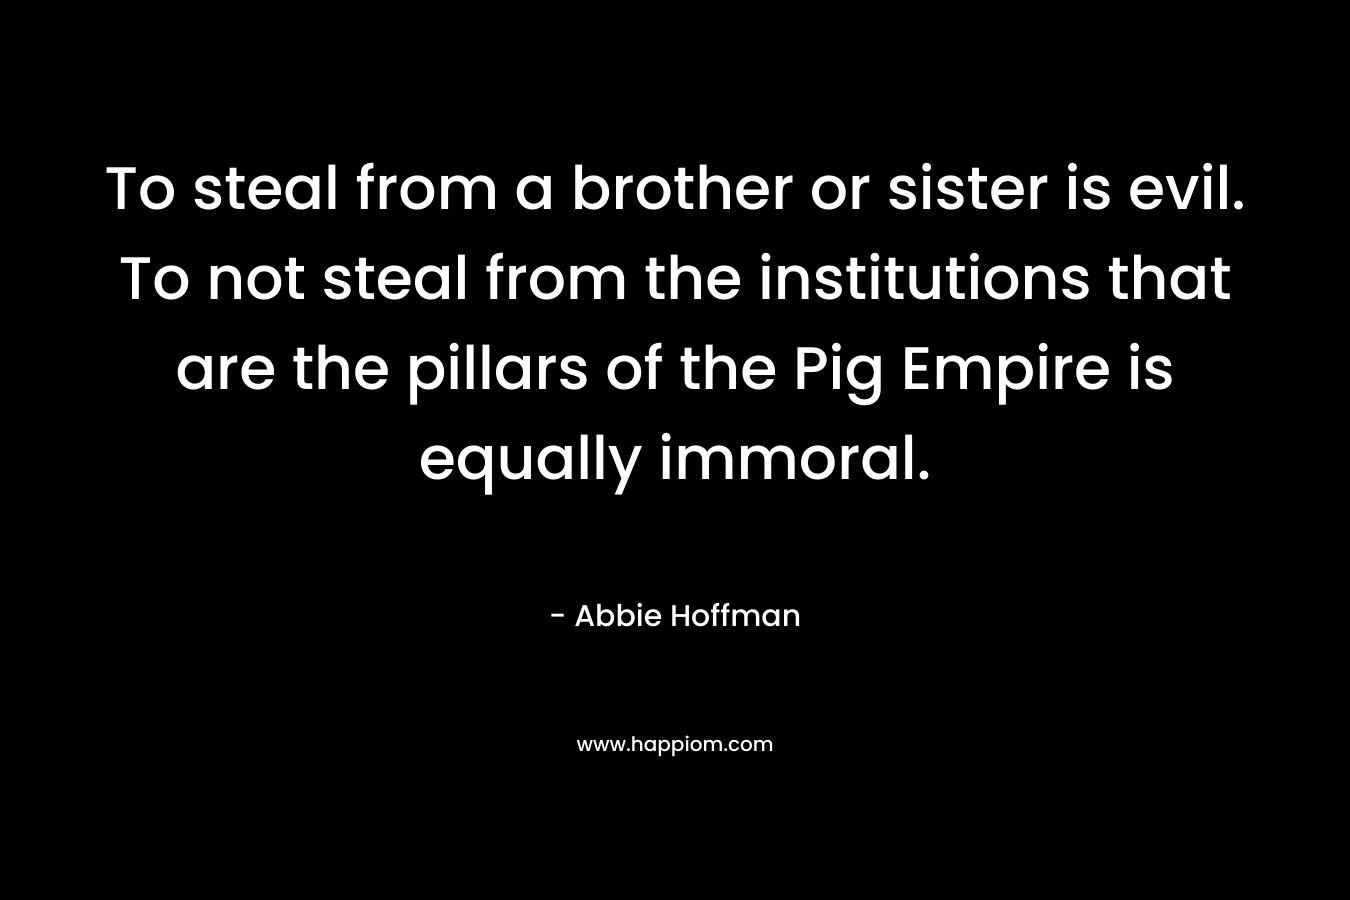 To steal from a brother or sister is evil. To not steal from the institutions that are the pillars of the Pig Empire is equally immoral. – Abbie Hoffman